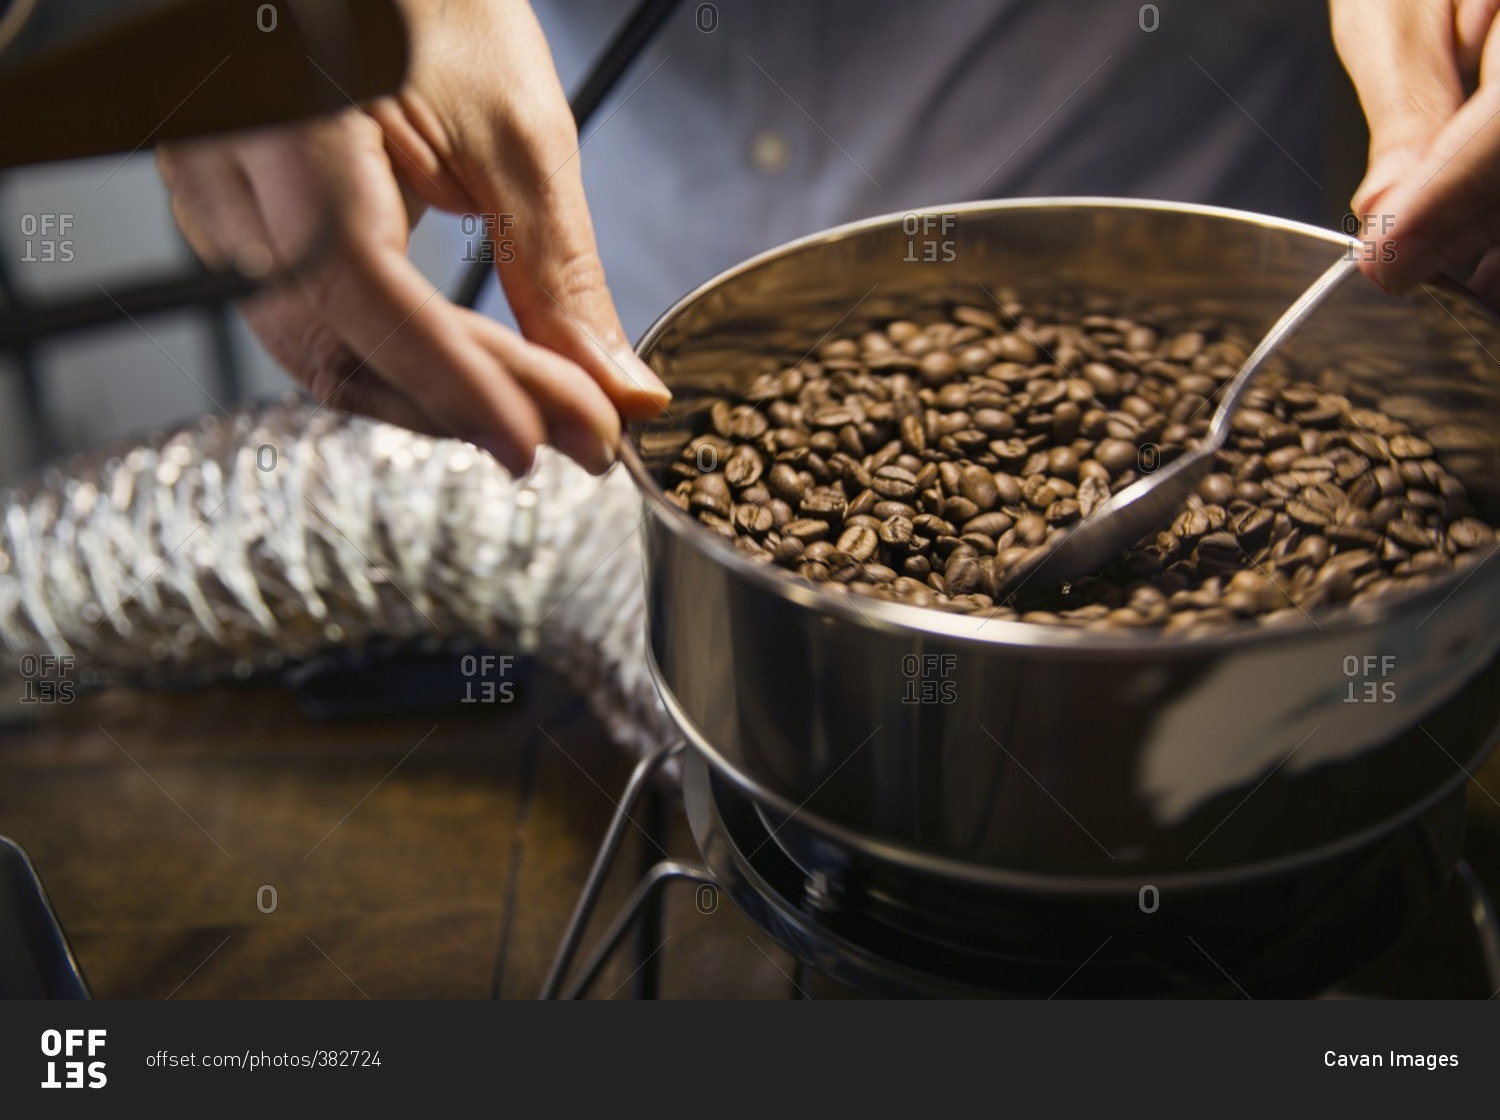 Midsection of man roasting coffee beans in machinery at cafe